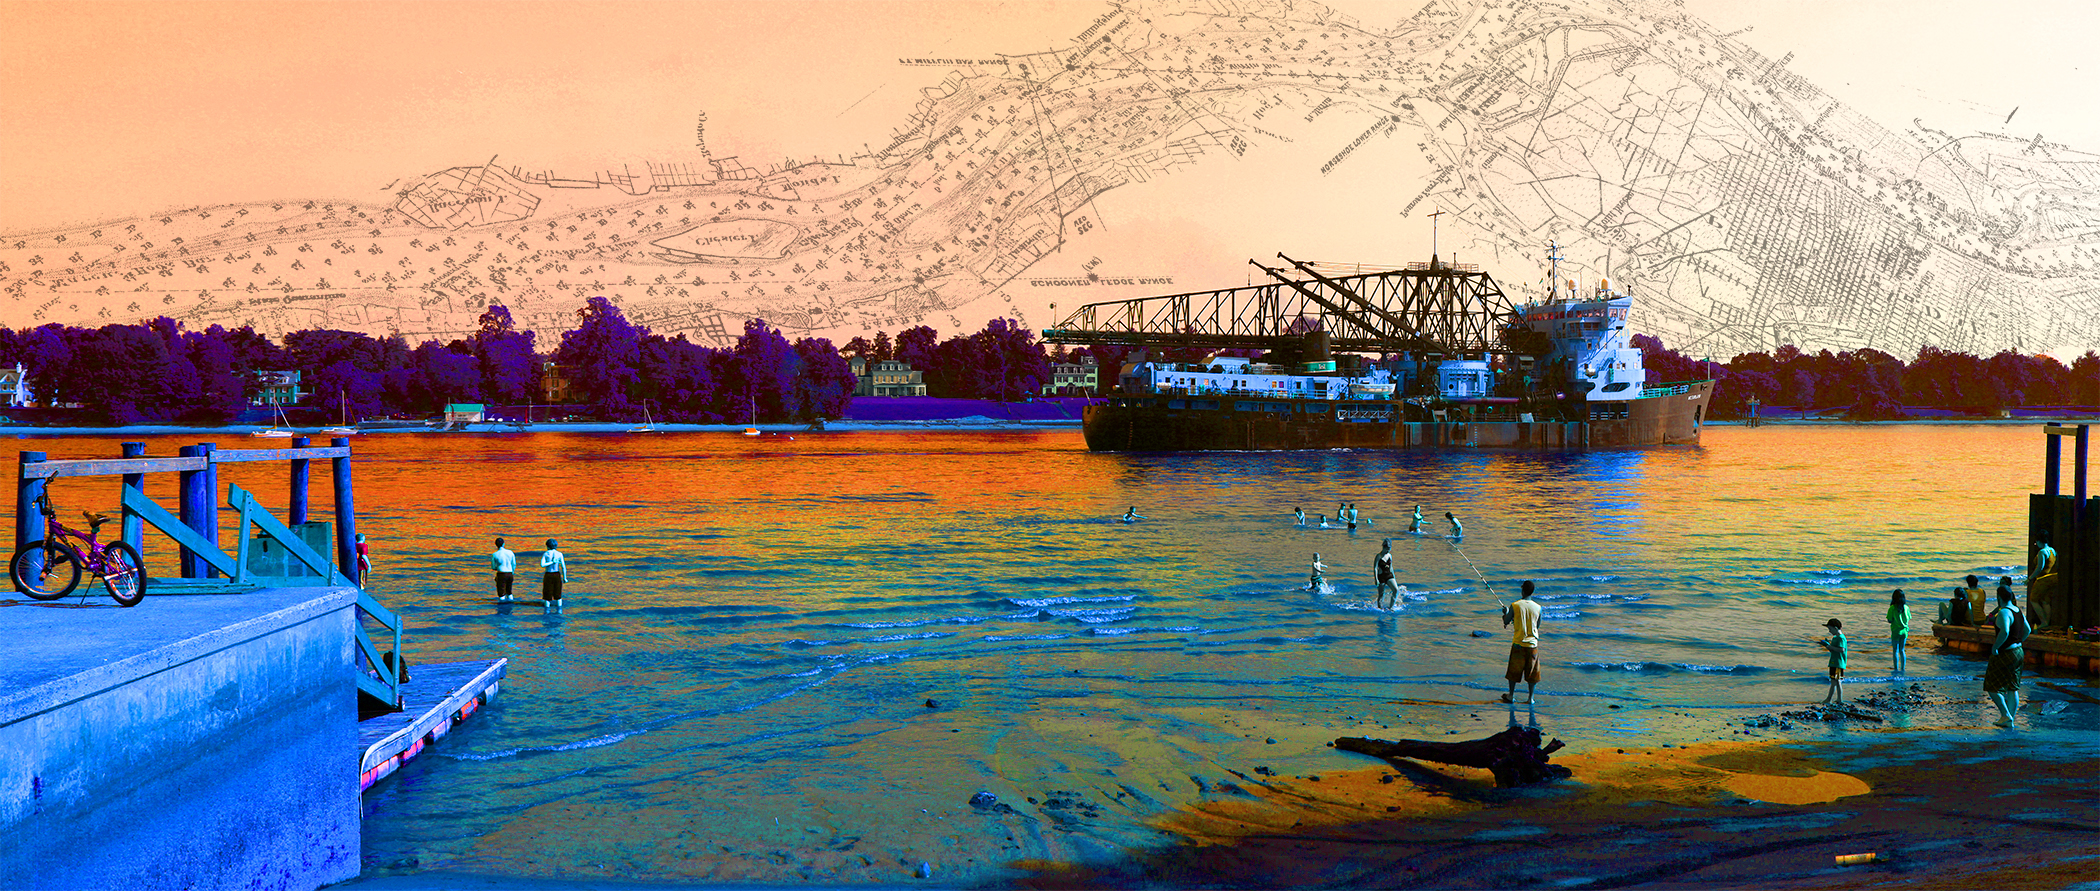 A colorful artist's rendering of a river with people fishing with a barge in the background and a drawing of an old map on the horizon